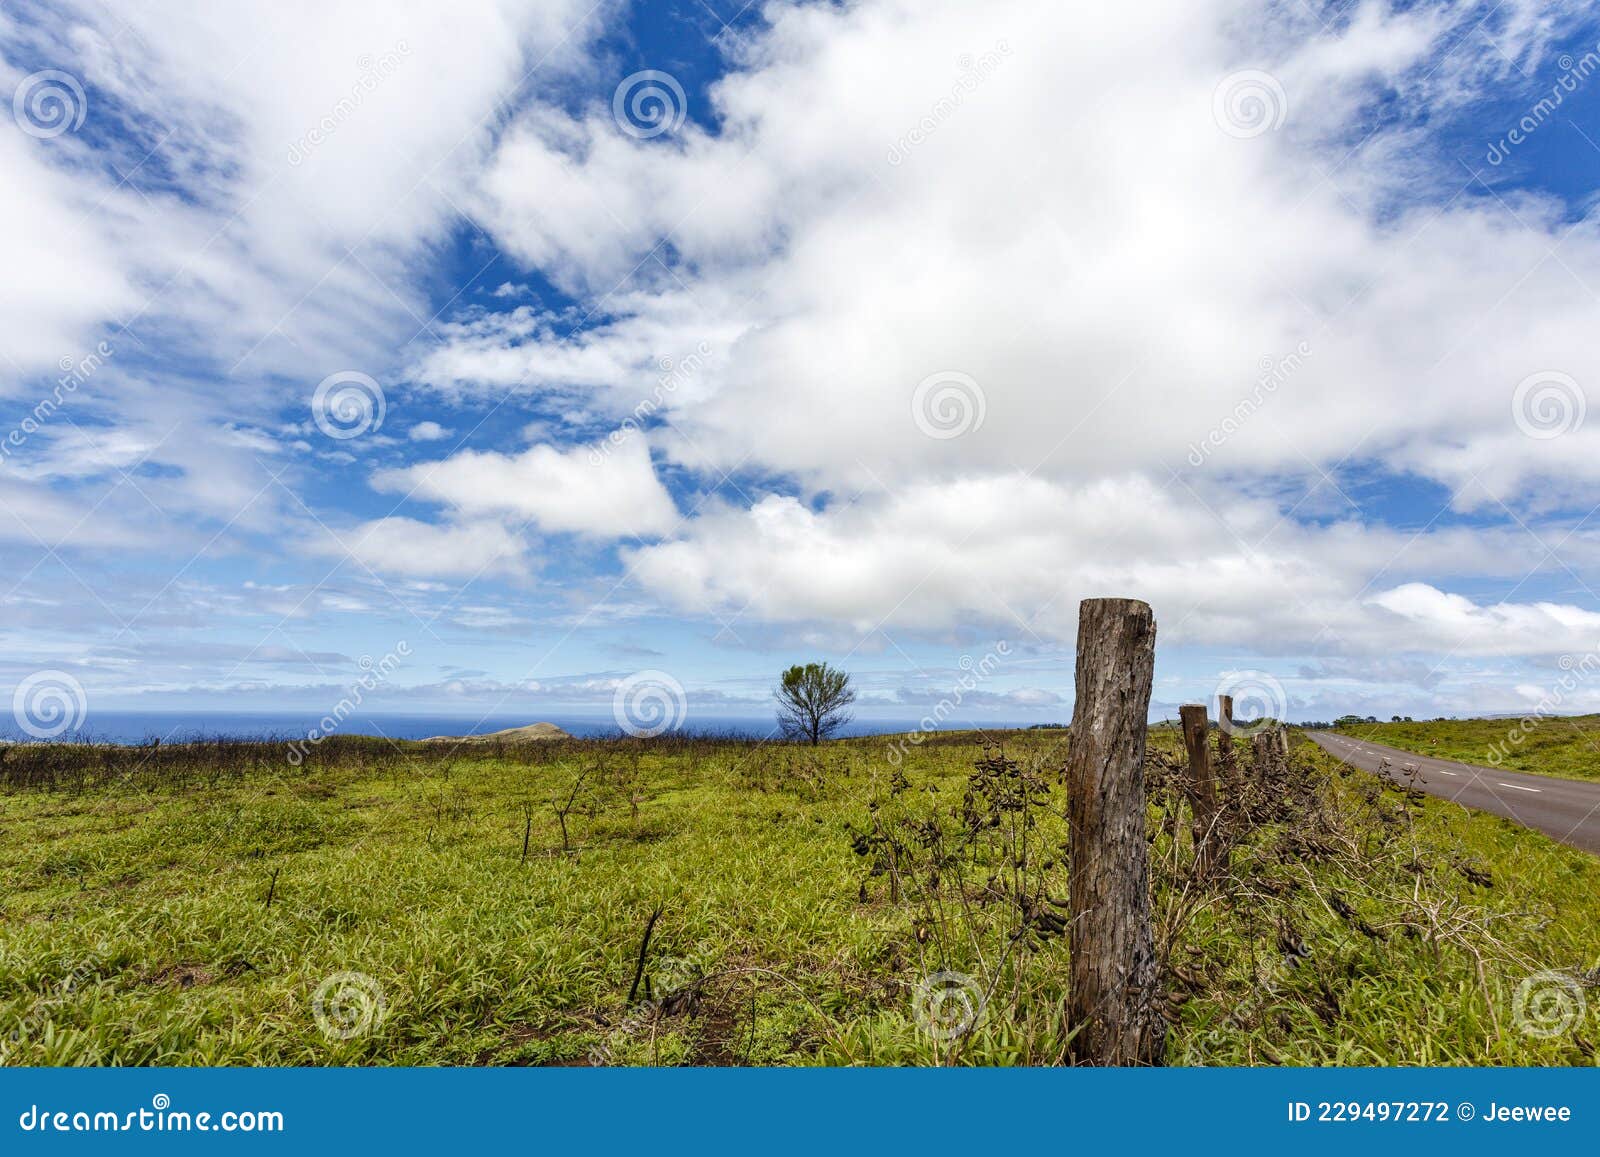 easter island rapa nui or isla de pascua landscape with the pacific ocean in the background, chile